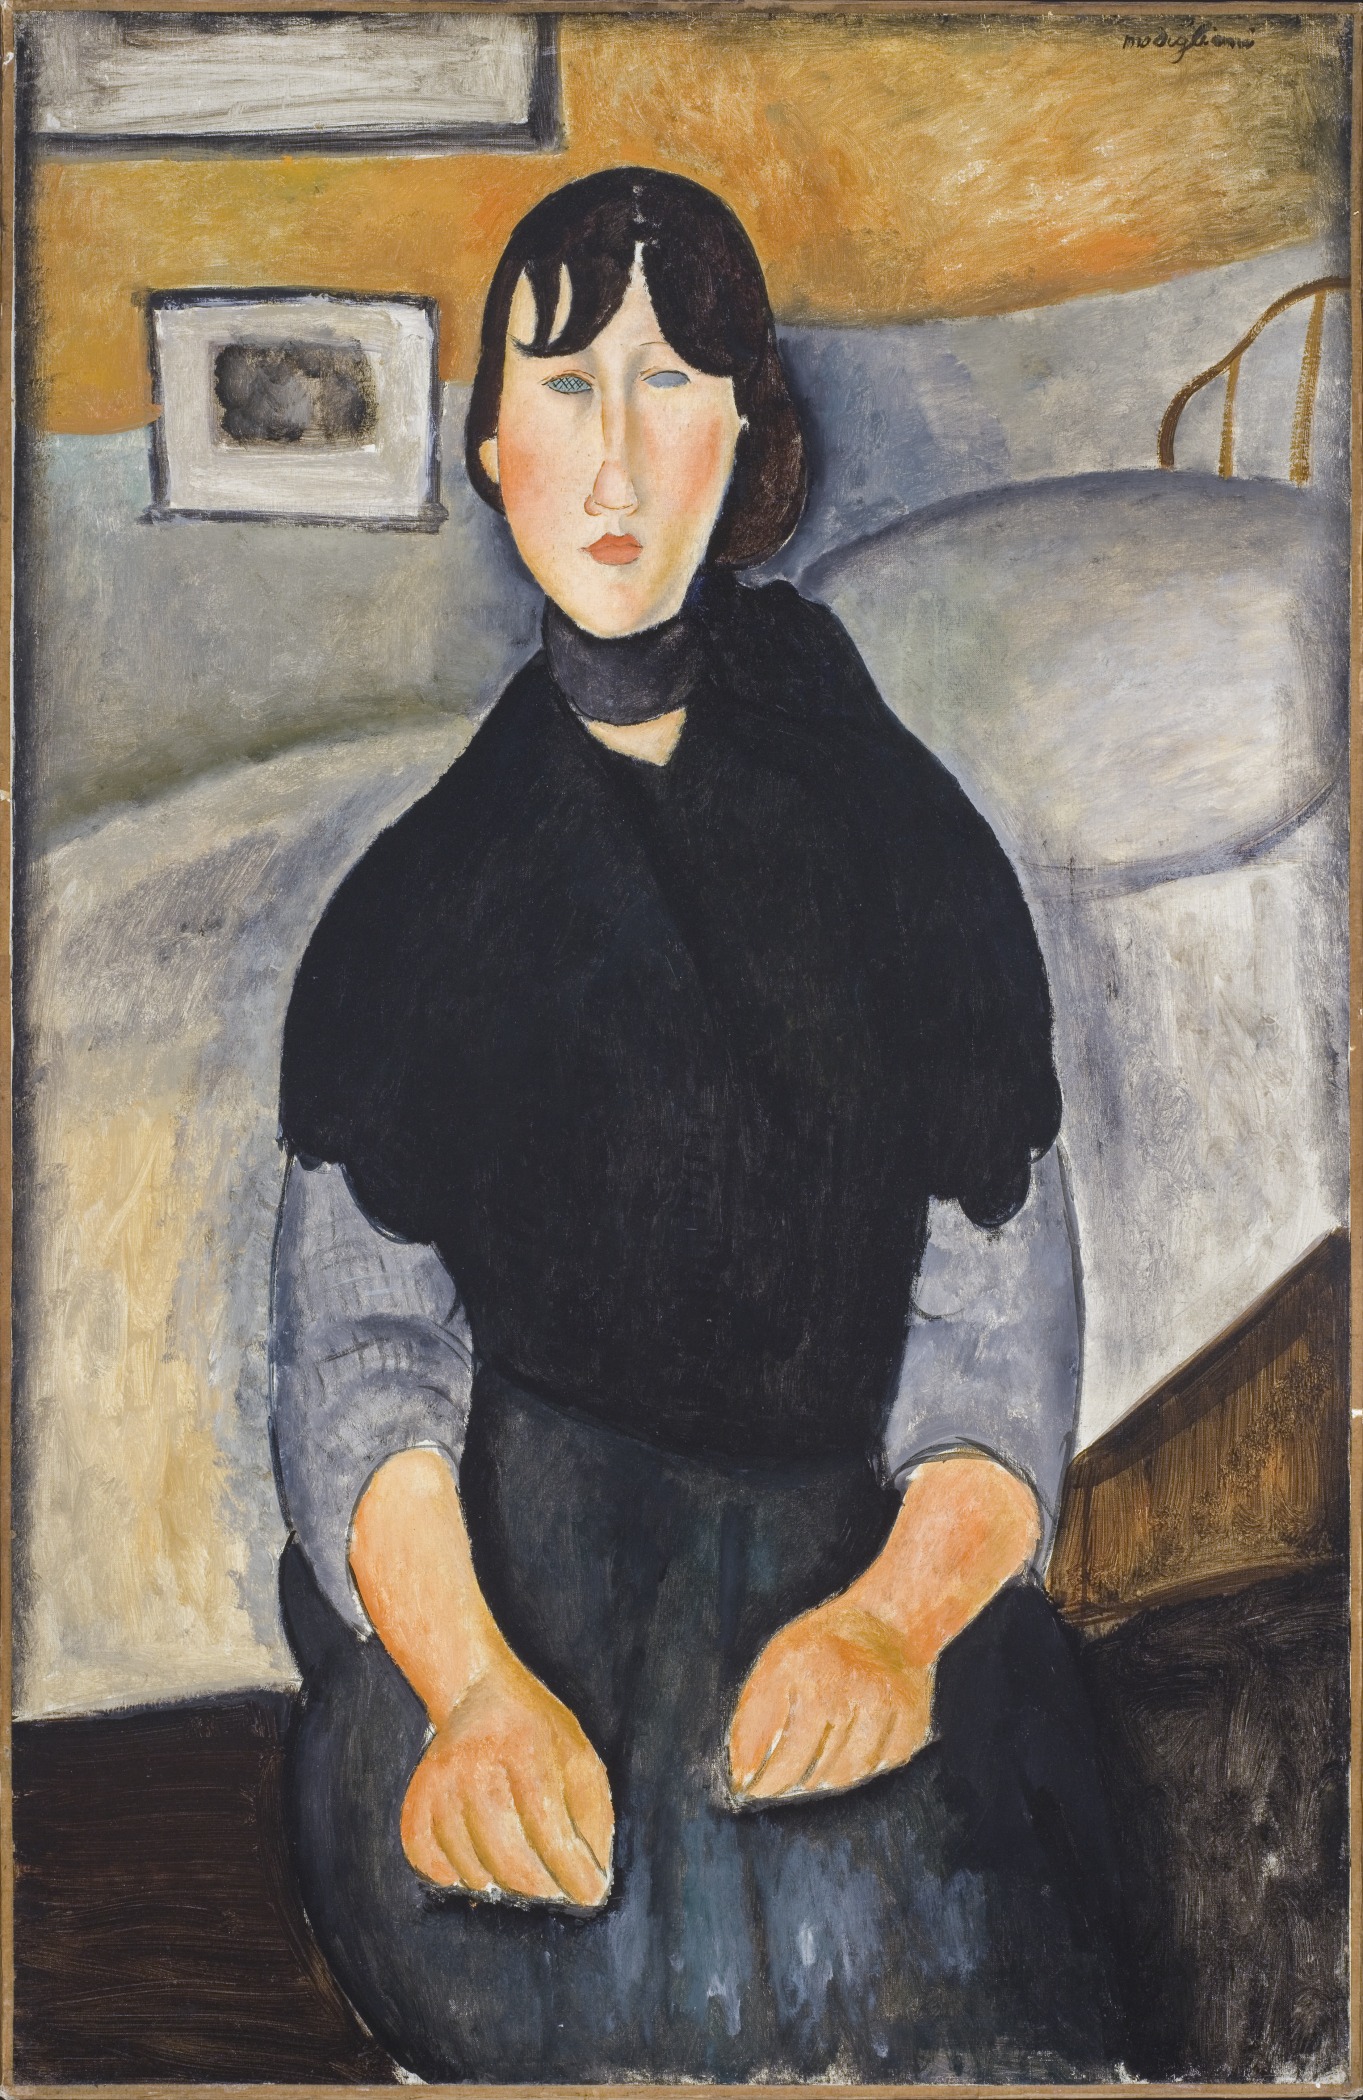 Junge Frau des Volkes by Amedeo Modigliani - 1918 - 89,535 x 64,135 cm LACMA, Los Angeles County Museum of Art